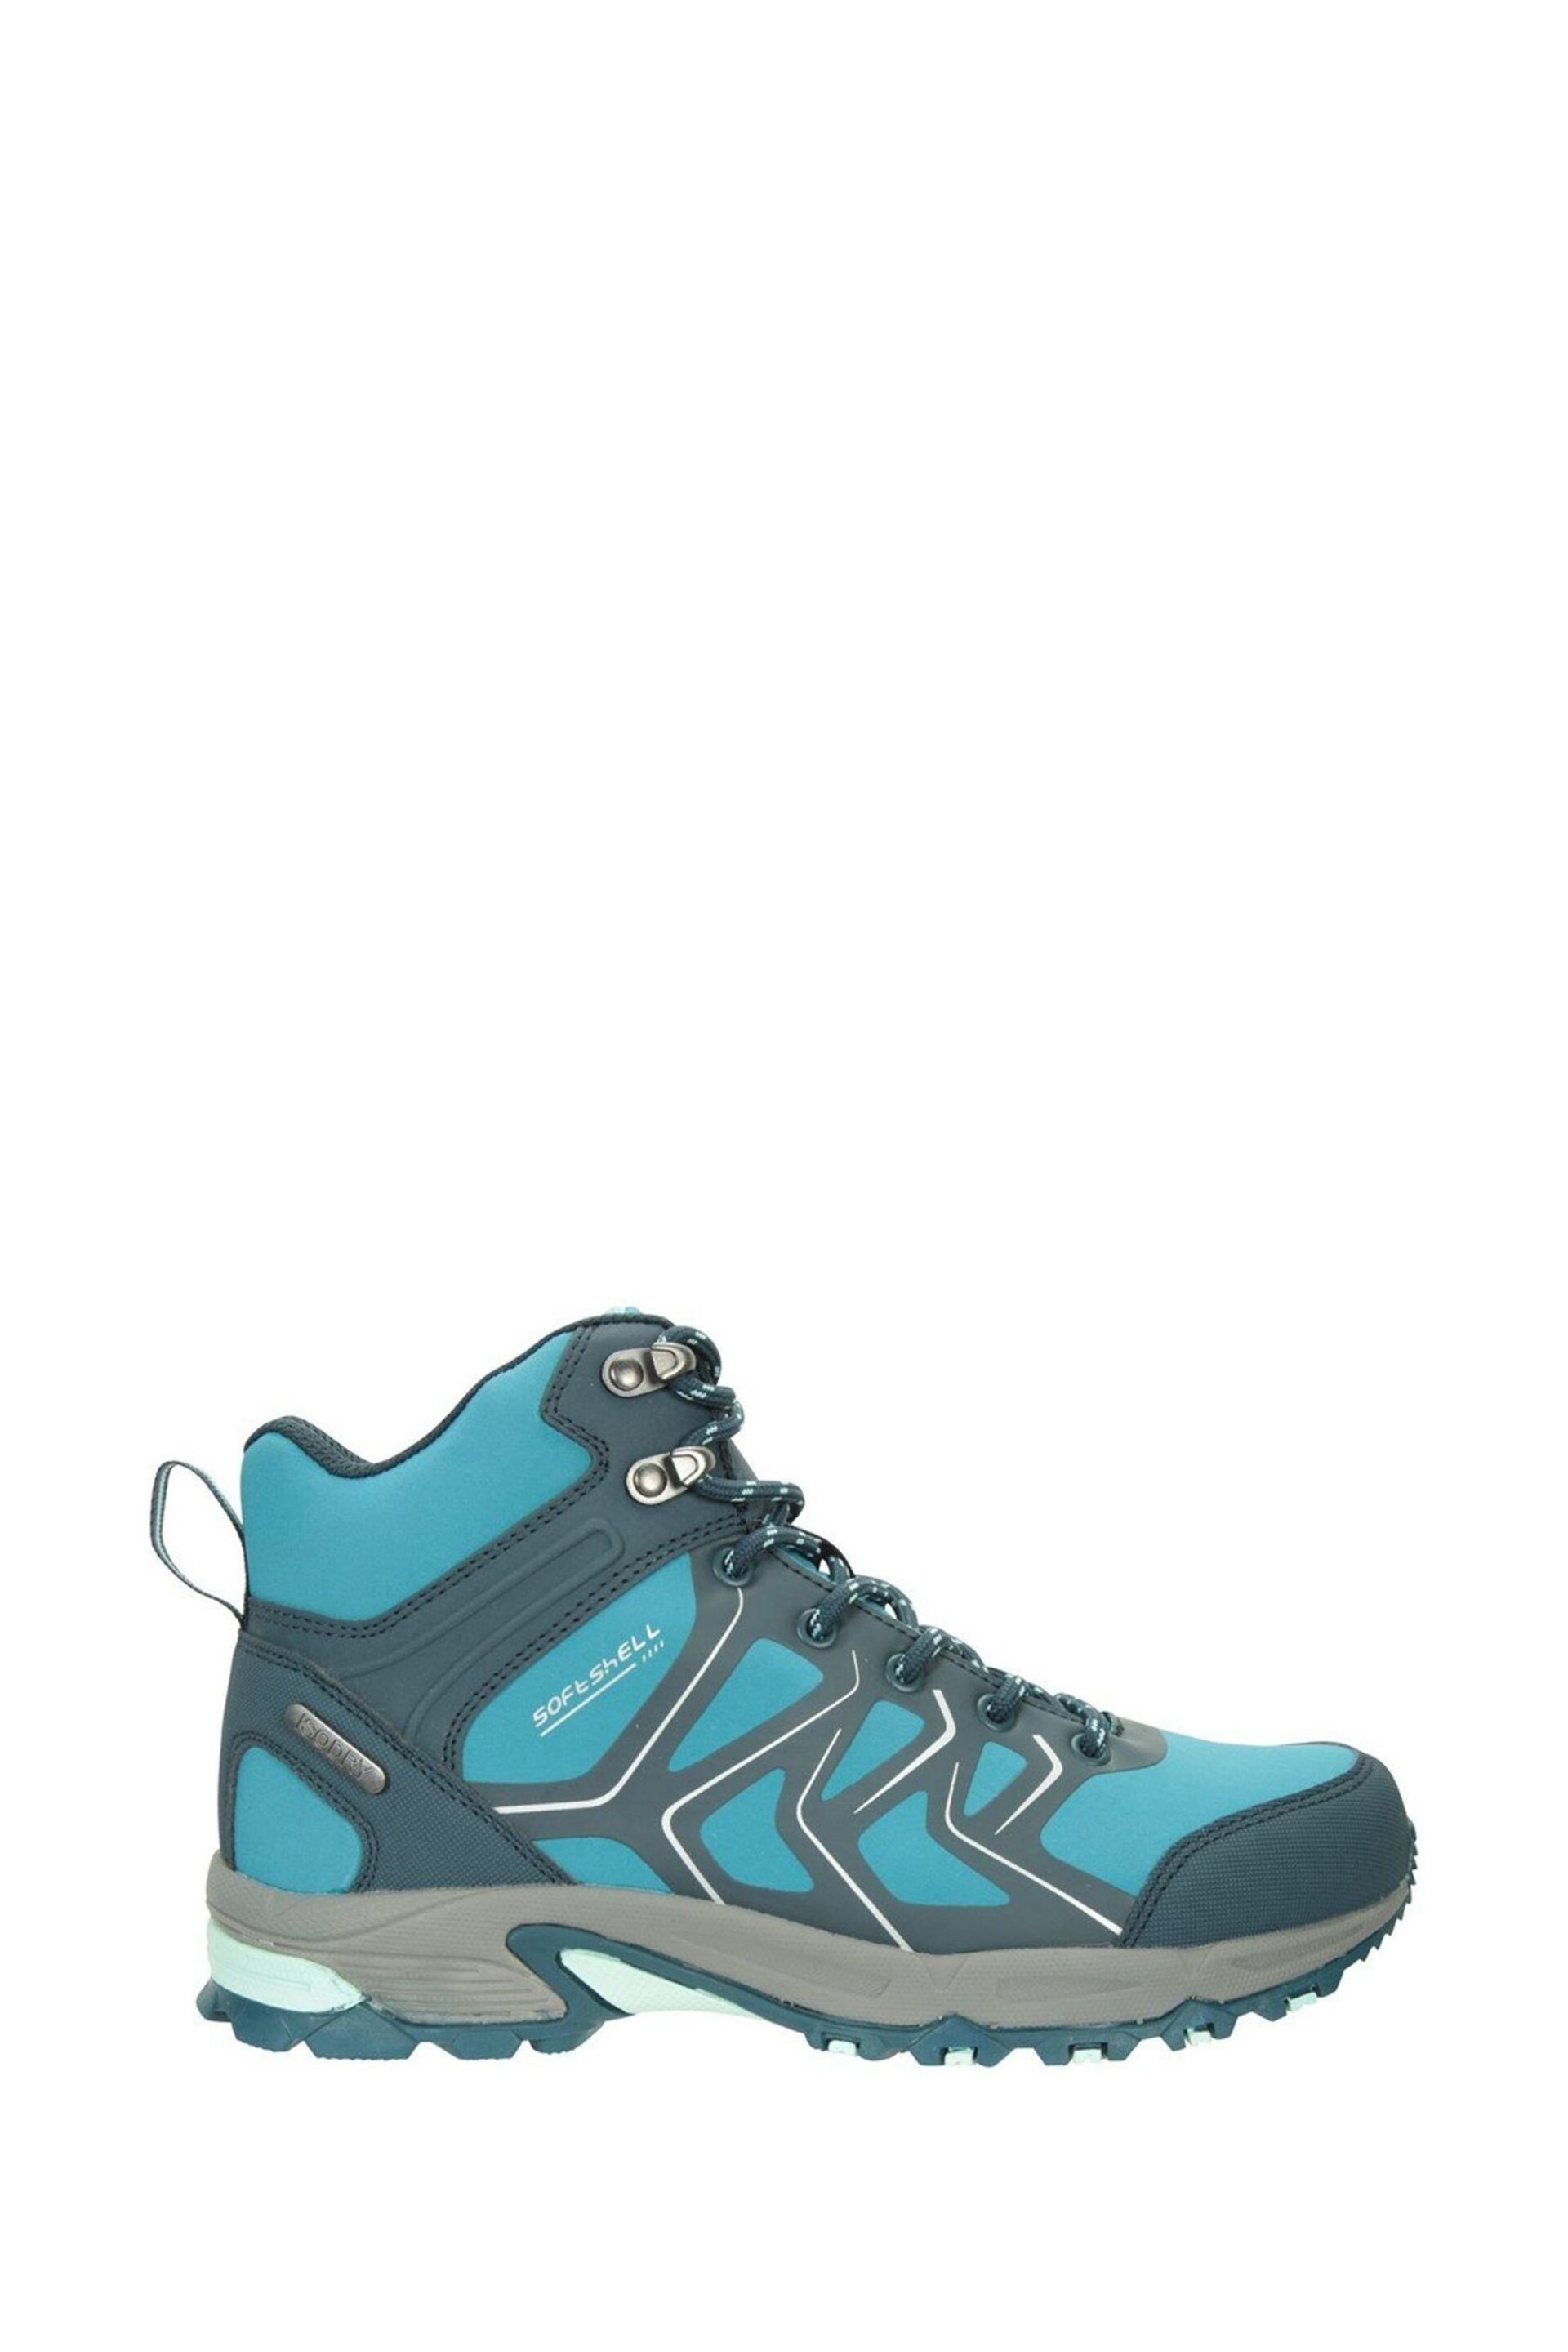 Mountain Warehouse Teal Shadow Womens Waterproof, Breathable Softshell Walking Boots - Image 1 of 2